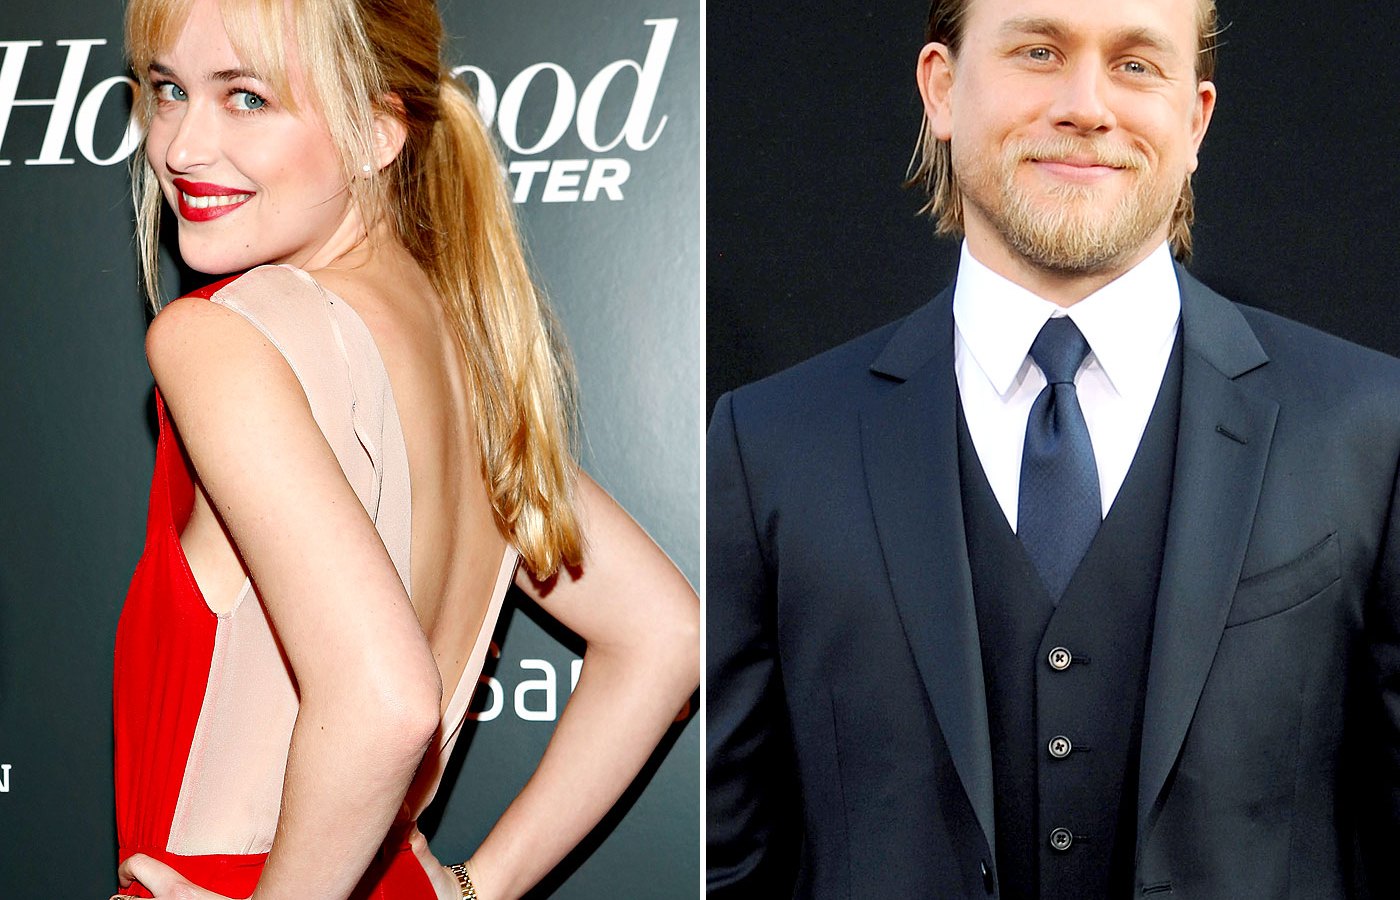 Dakota Johnson and Charlie Hunnam have been cast in 50 Shades of Grey